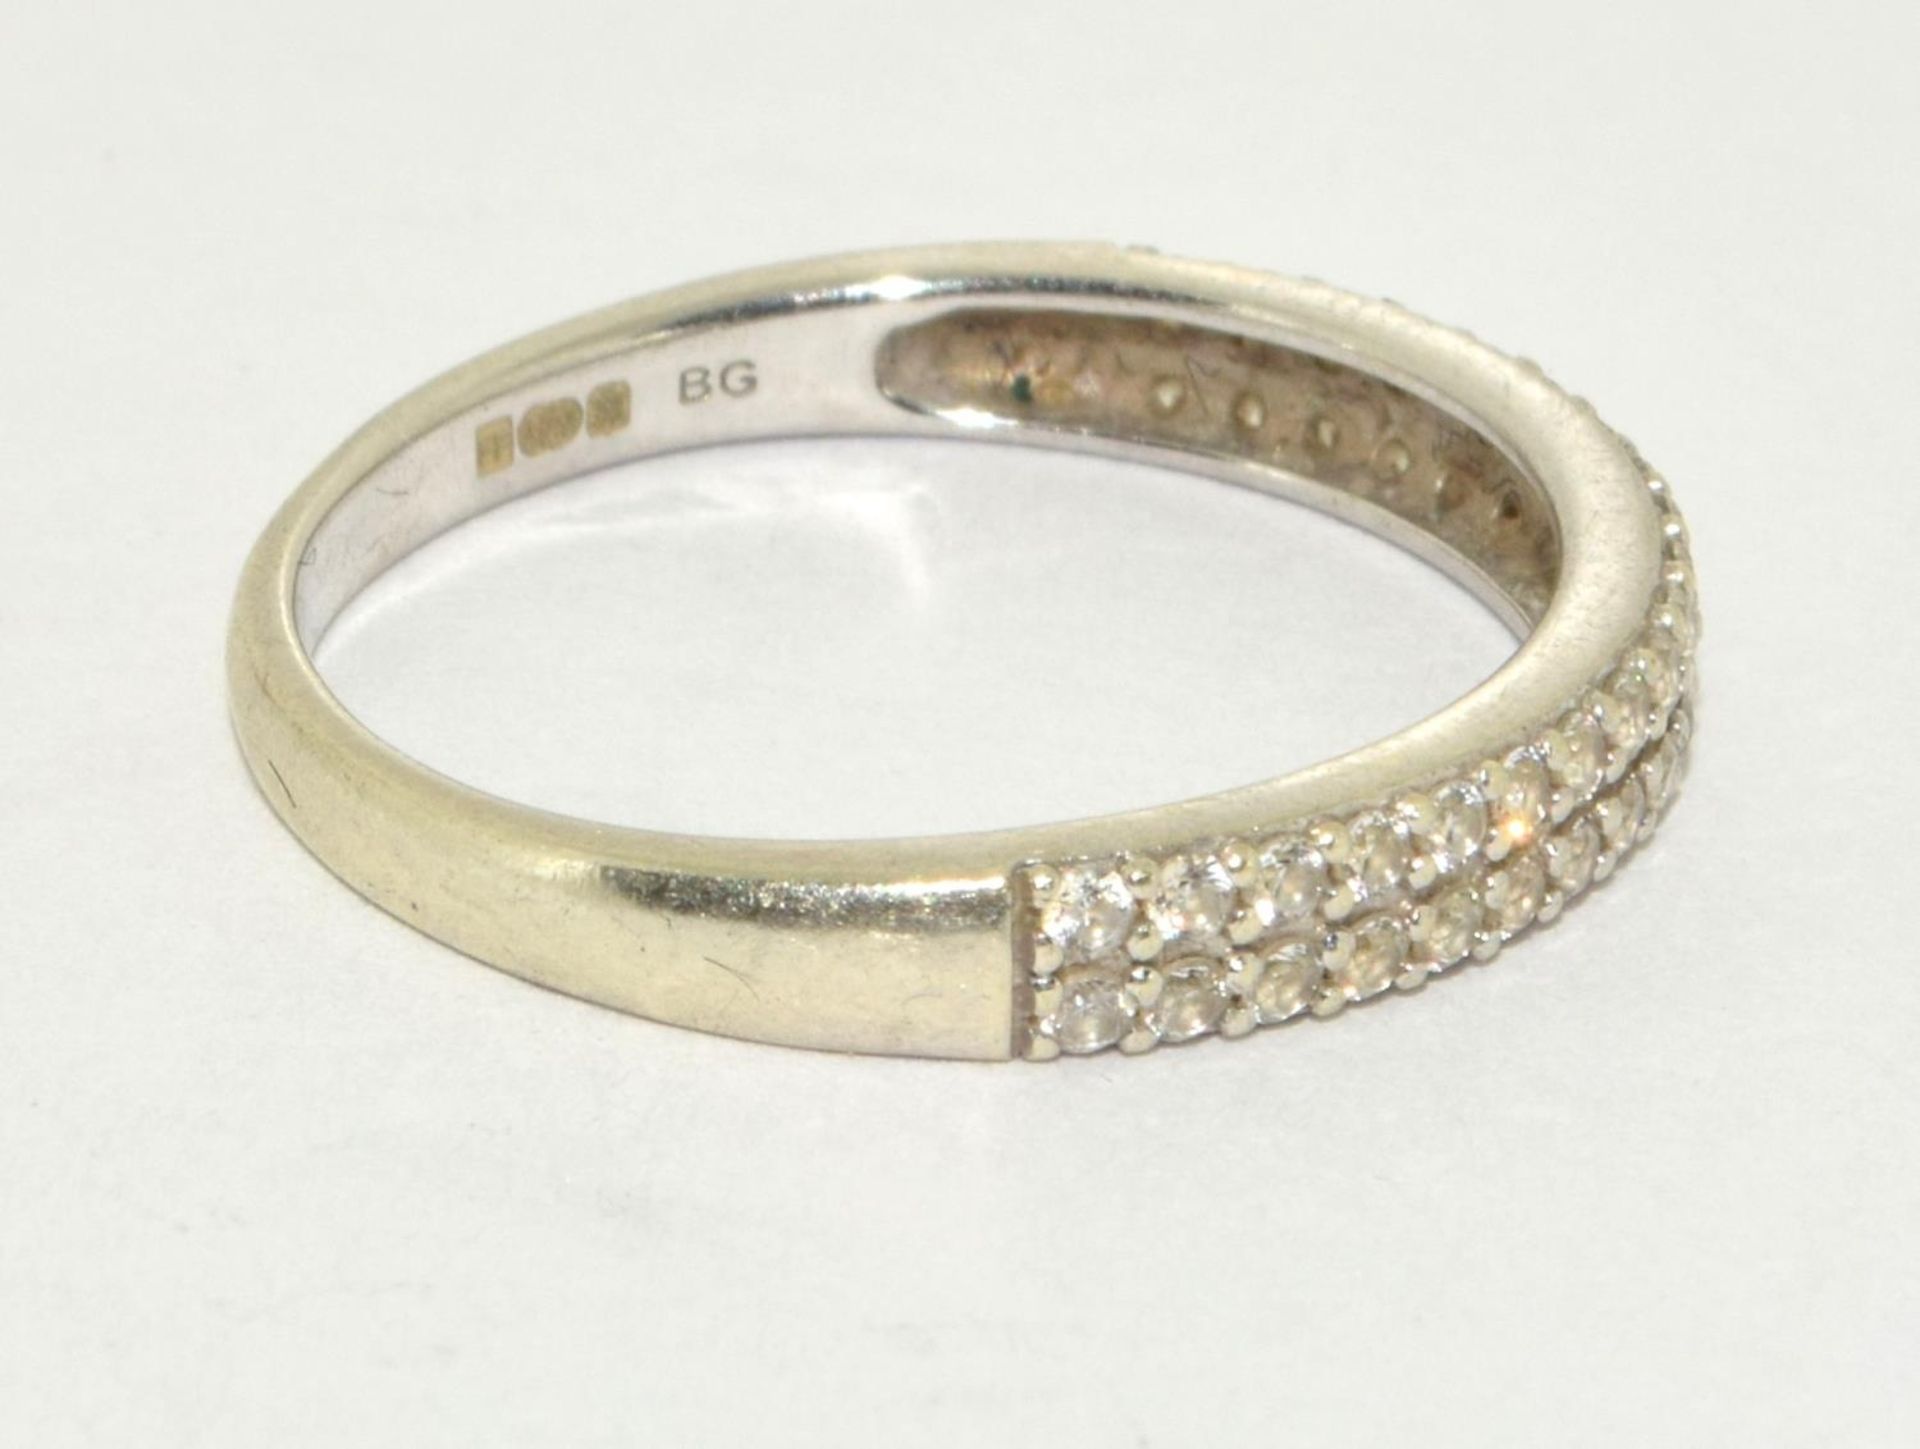 9ct white gold twin band 1/2 eternity ring size P - Image 4 of 5